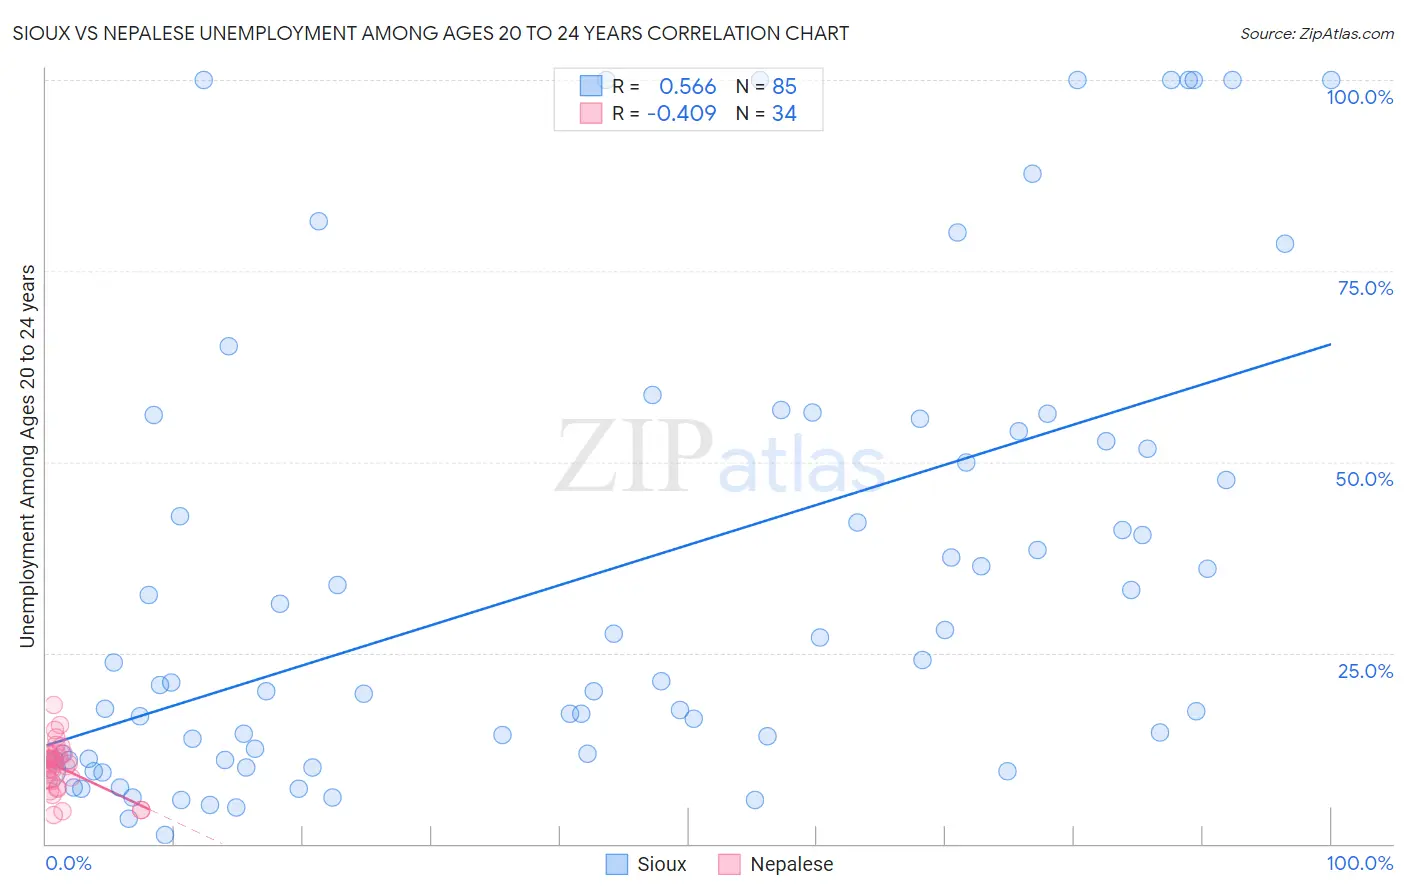 Sioux vs Nepalese Unemployment Among Ages 20 to 24 years